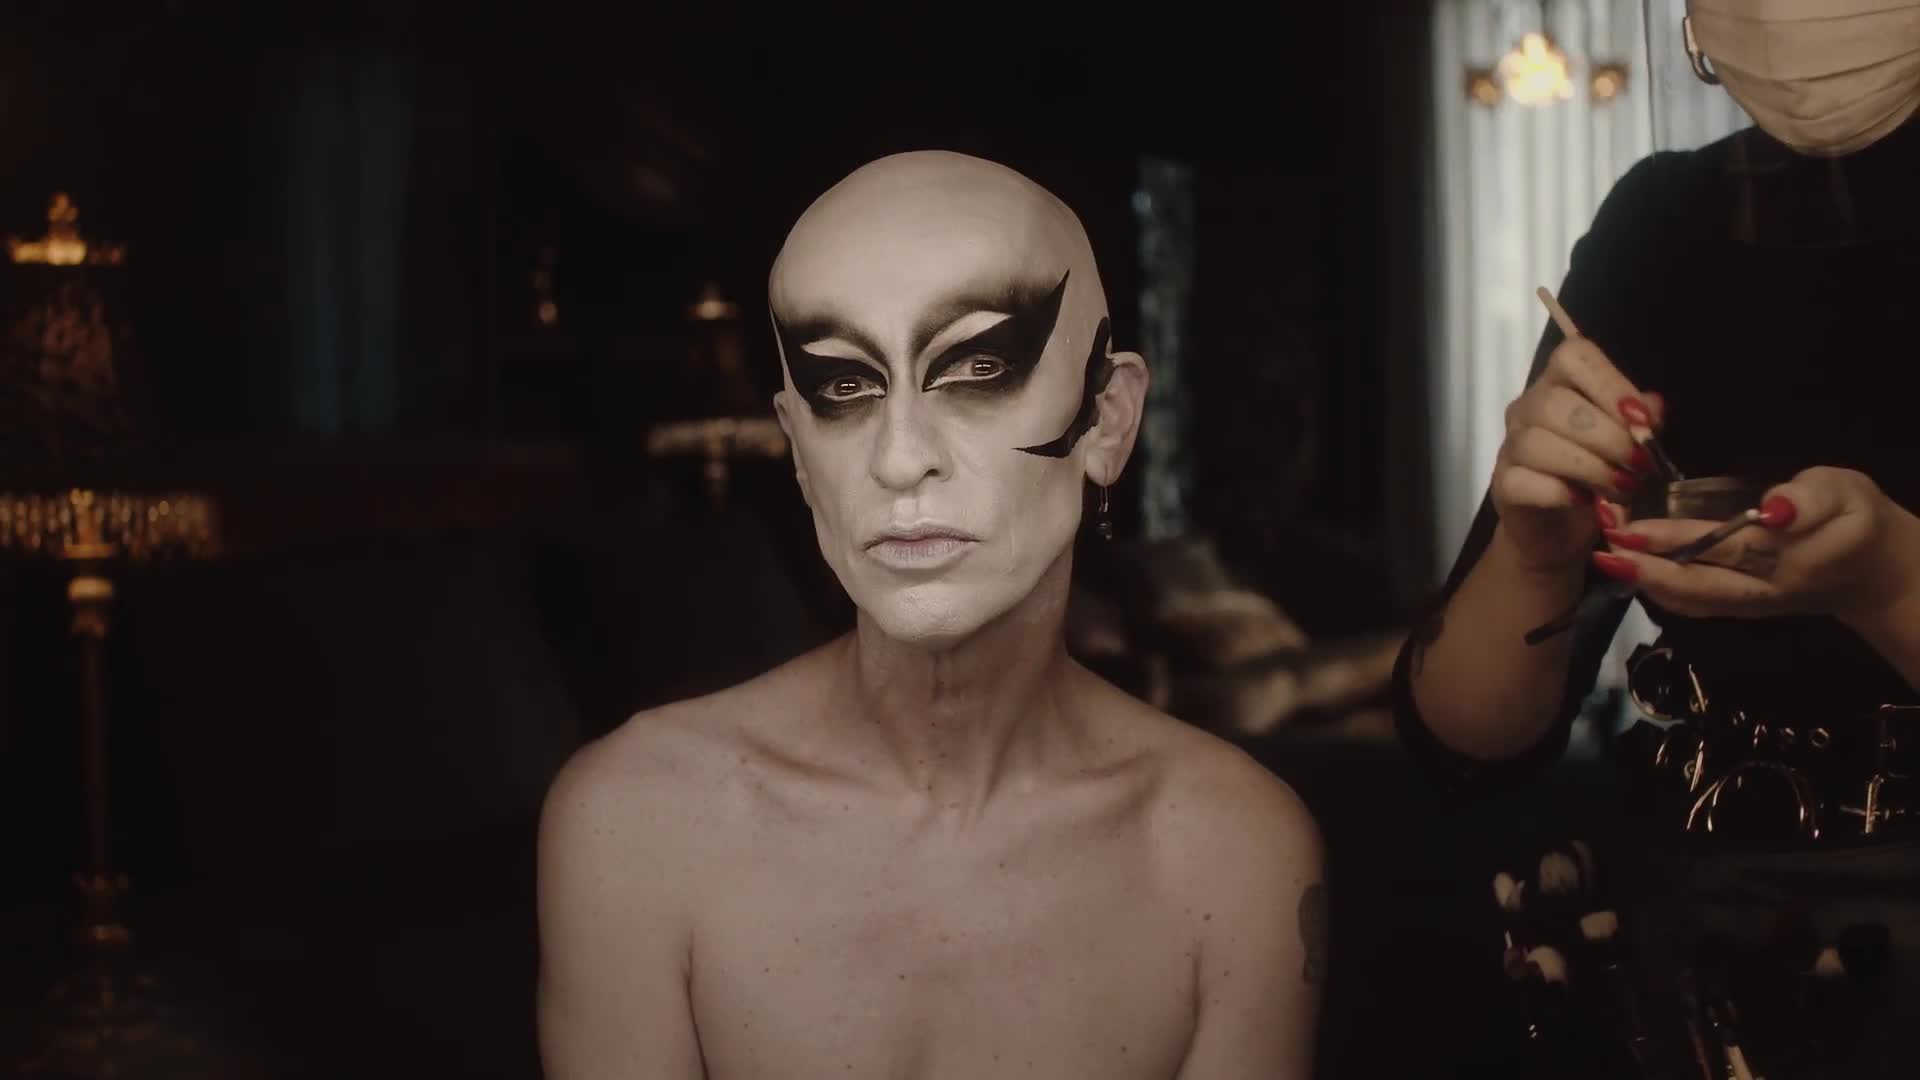 Watch Chadd Curry’s “Mother Goth” Extreme Beauty Transformation